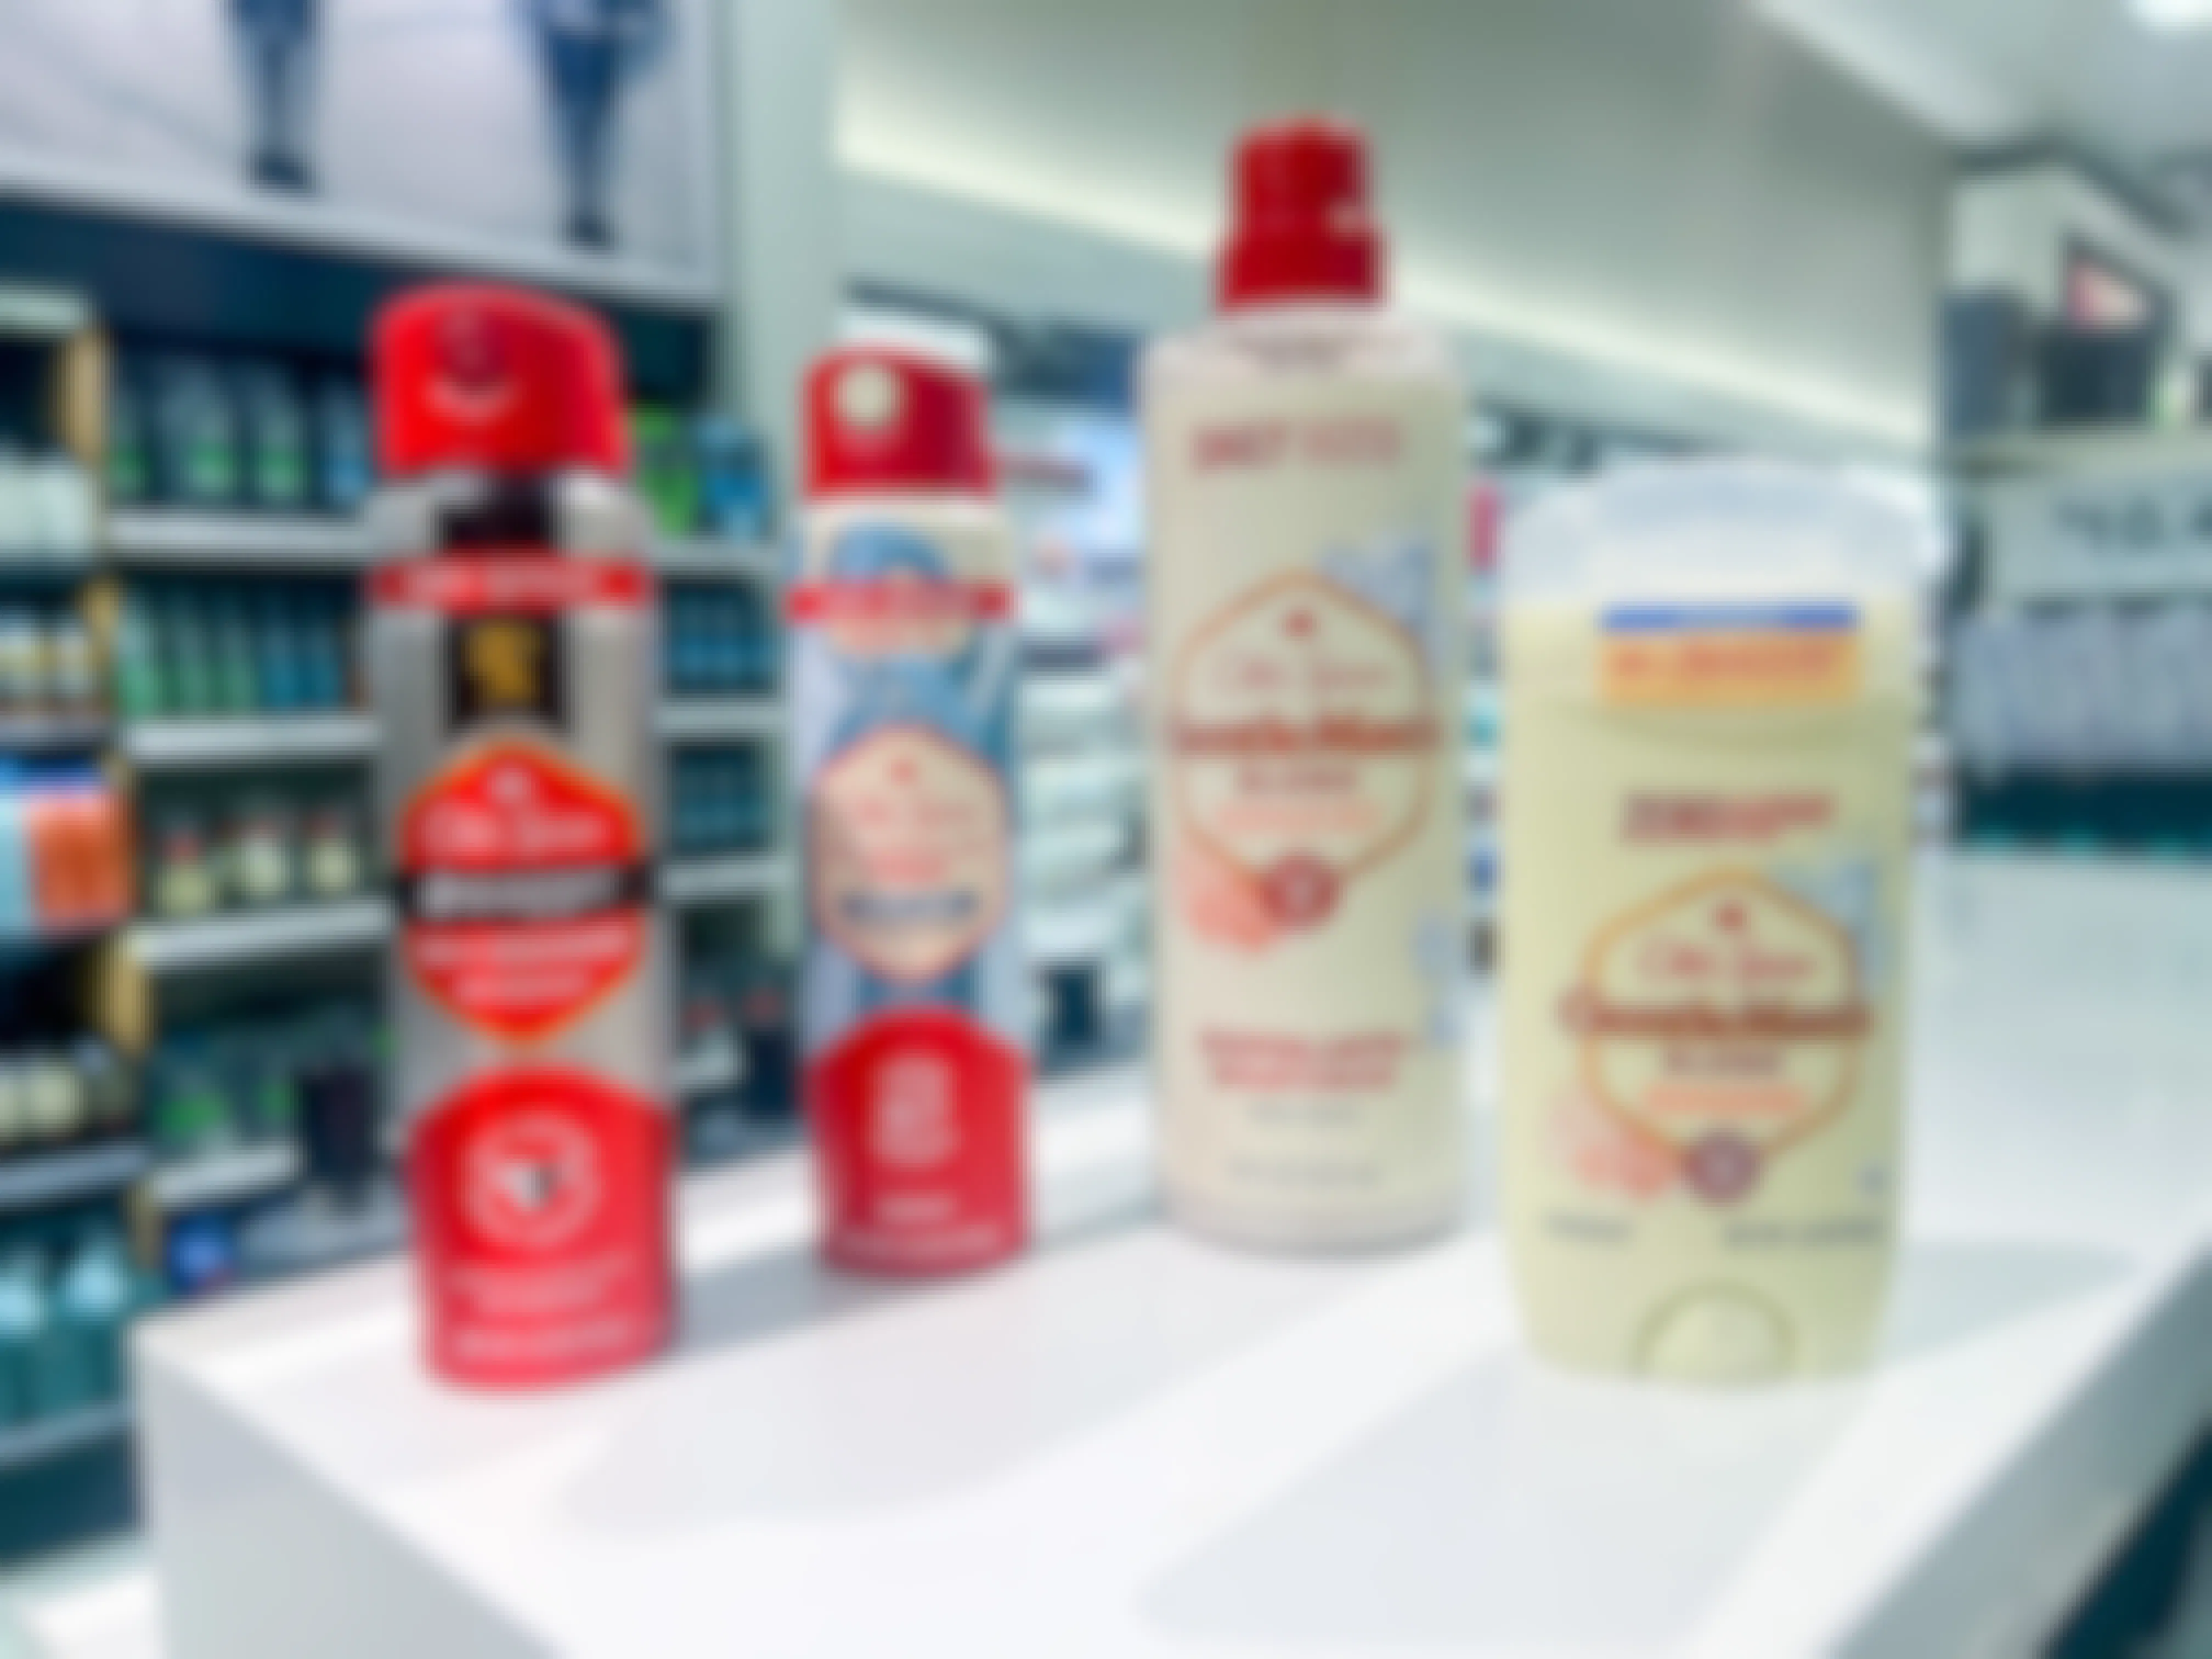 Old Spice Body Wash & Deodorant: Save Over $22 at Target